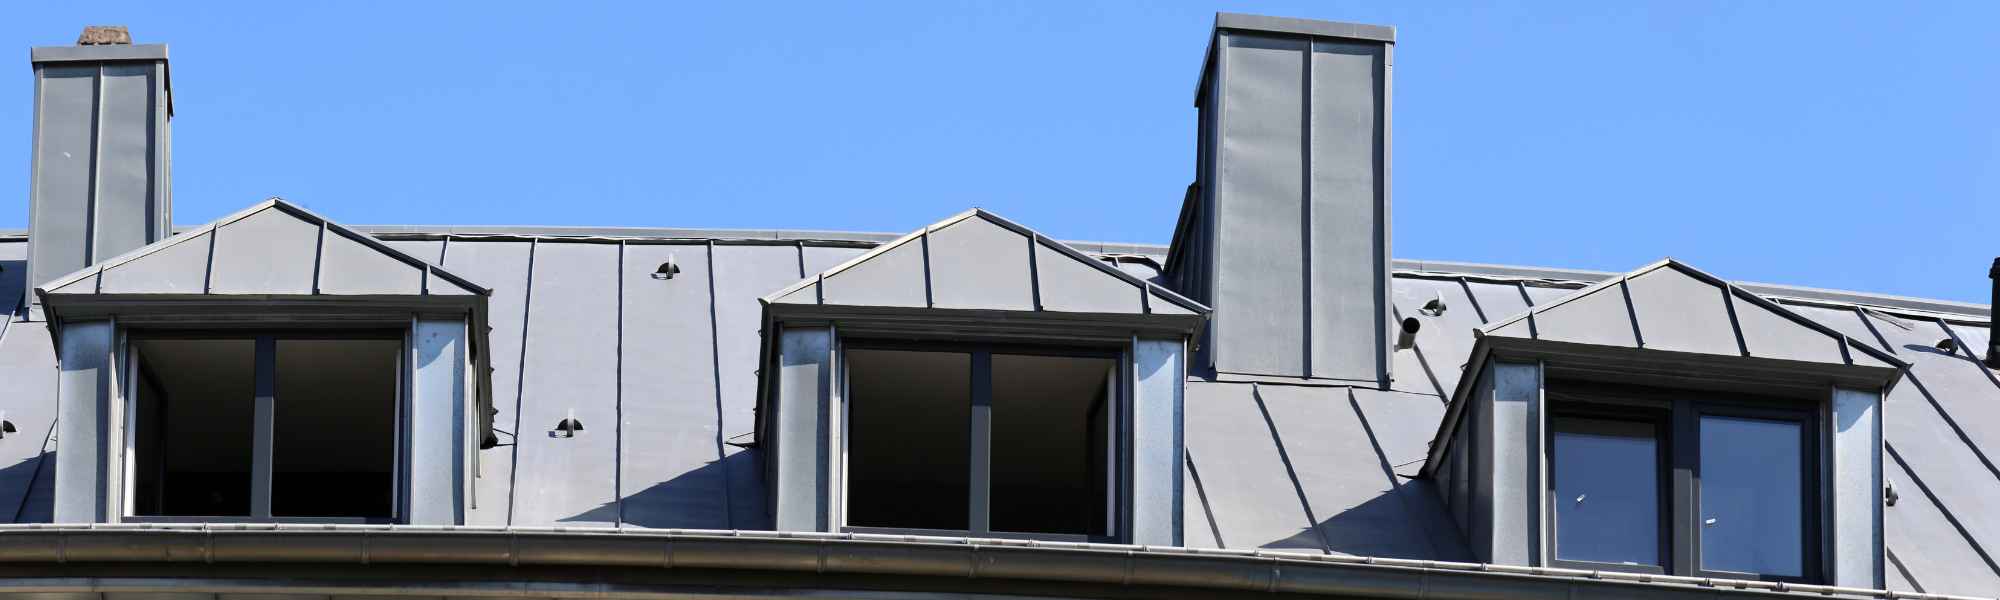 Roofing Tips for Condo Owners - best roofing company - metal roof contractor - roofer - leading residential and commercial roof repair companies - Pensacola, Panama City, Destin, Port Charlotte, Fort Myers, Sarasota, Punta Gorda, Navarre, Milton, Gulf Breeze, Mary Esther, Lynn Haven